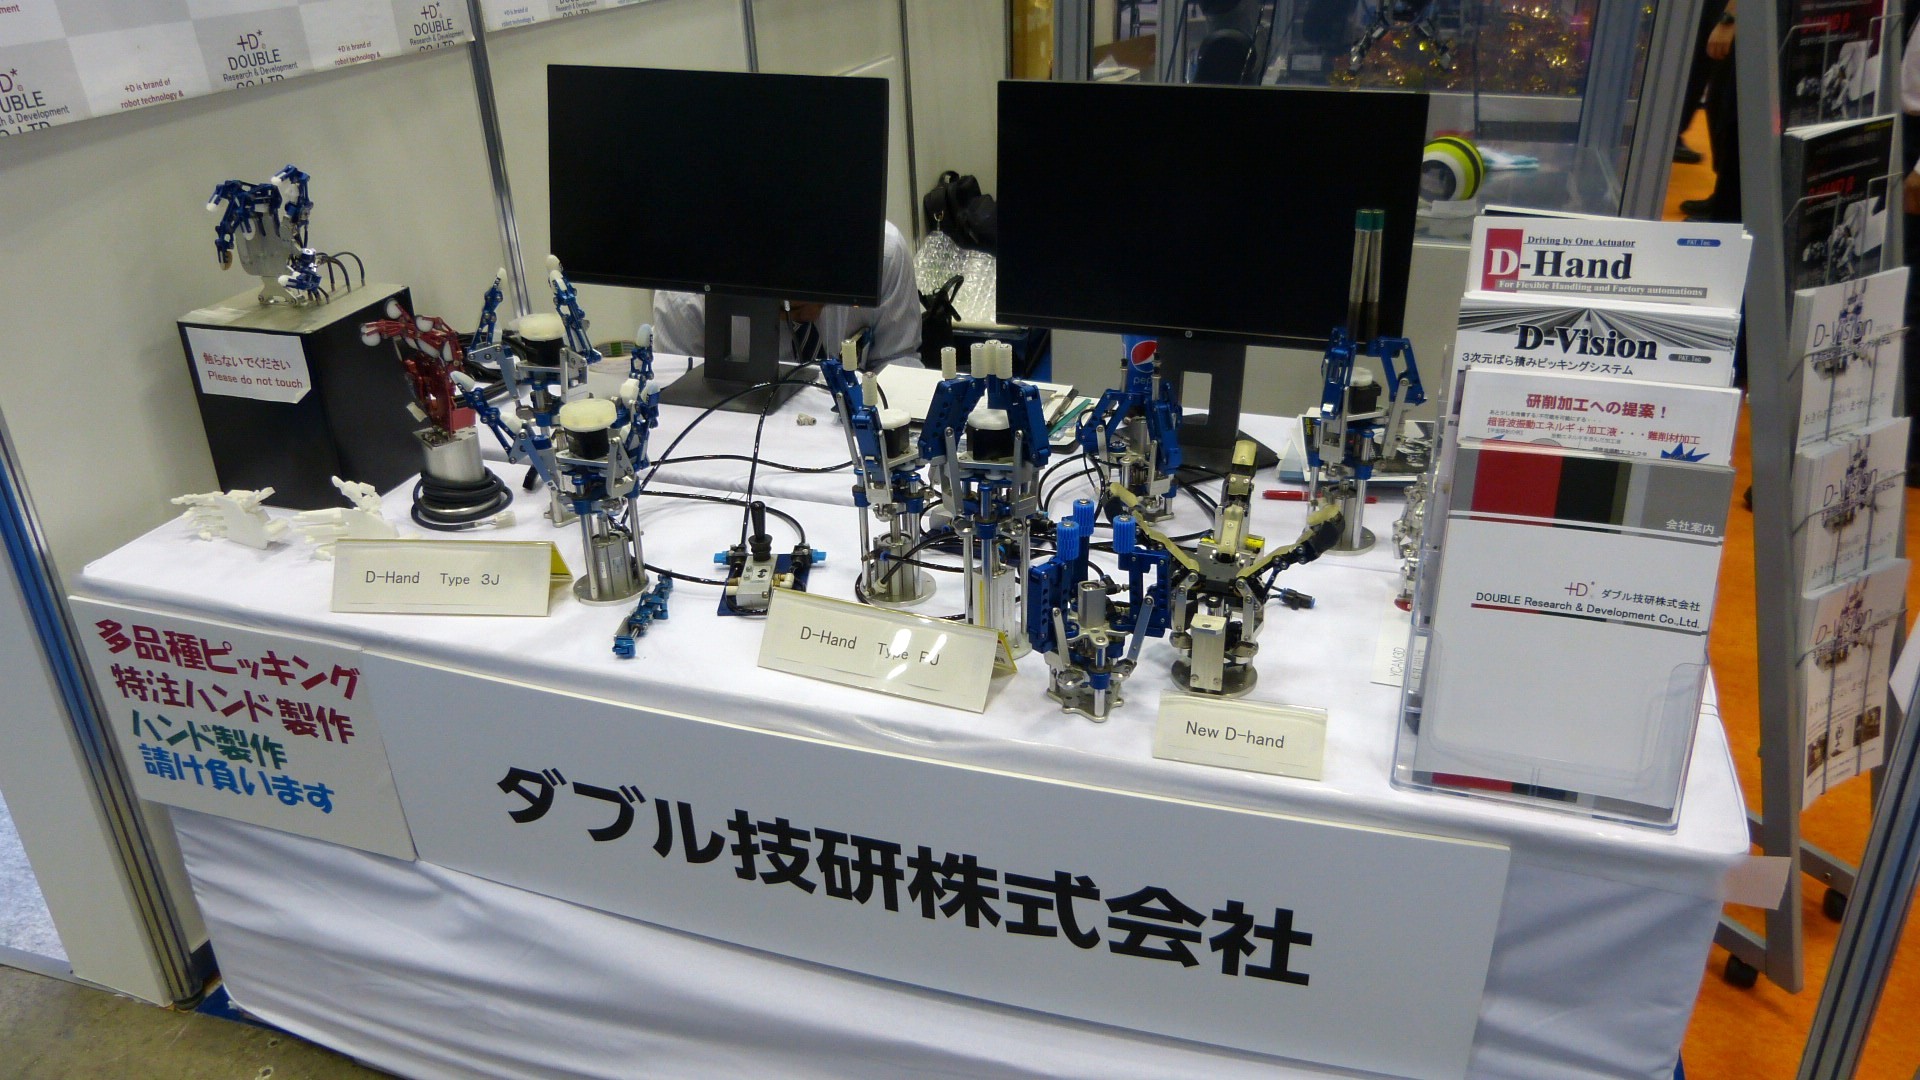 a counter of robot hands of various metallic colours with pamphlets for D-Hand and D-Vision